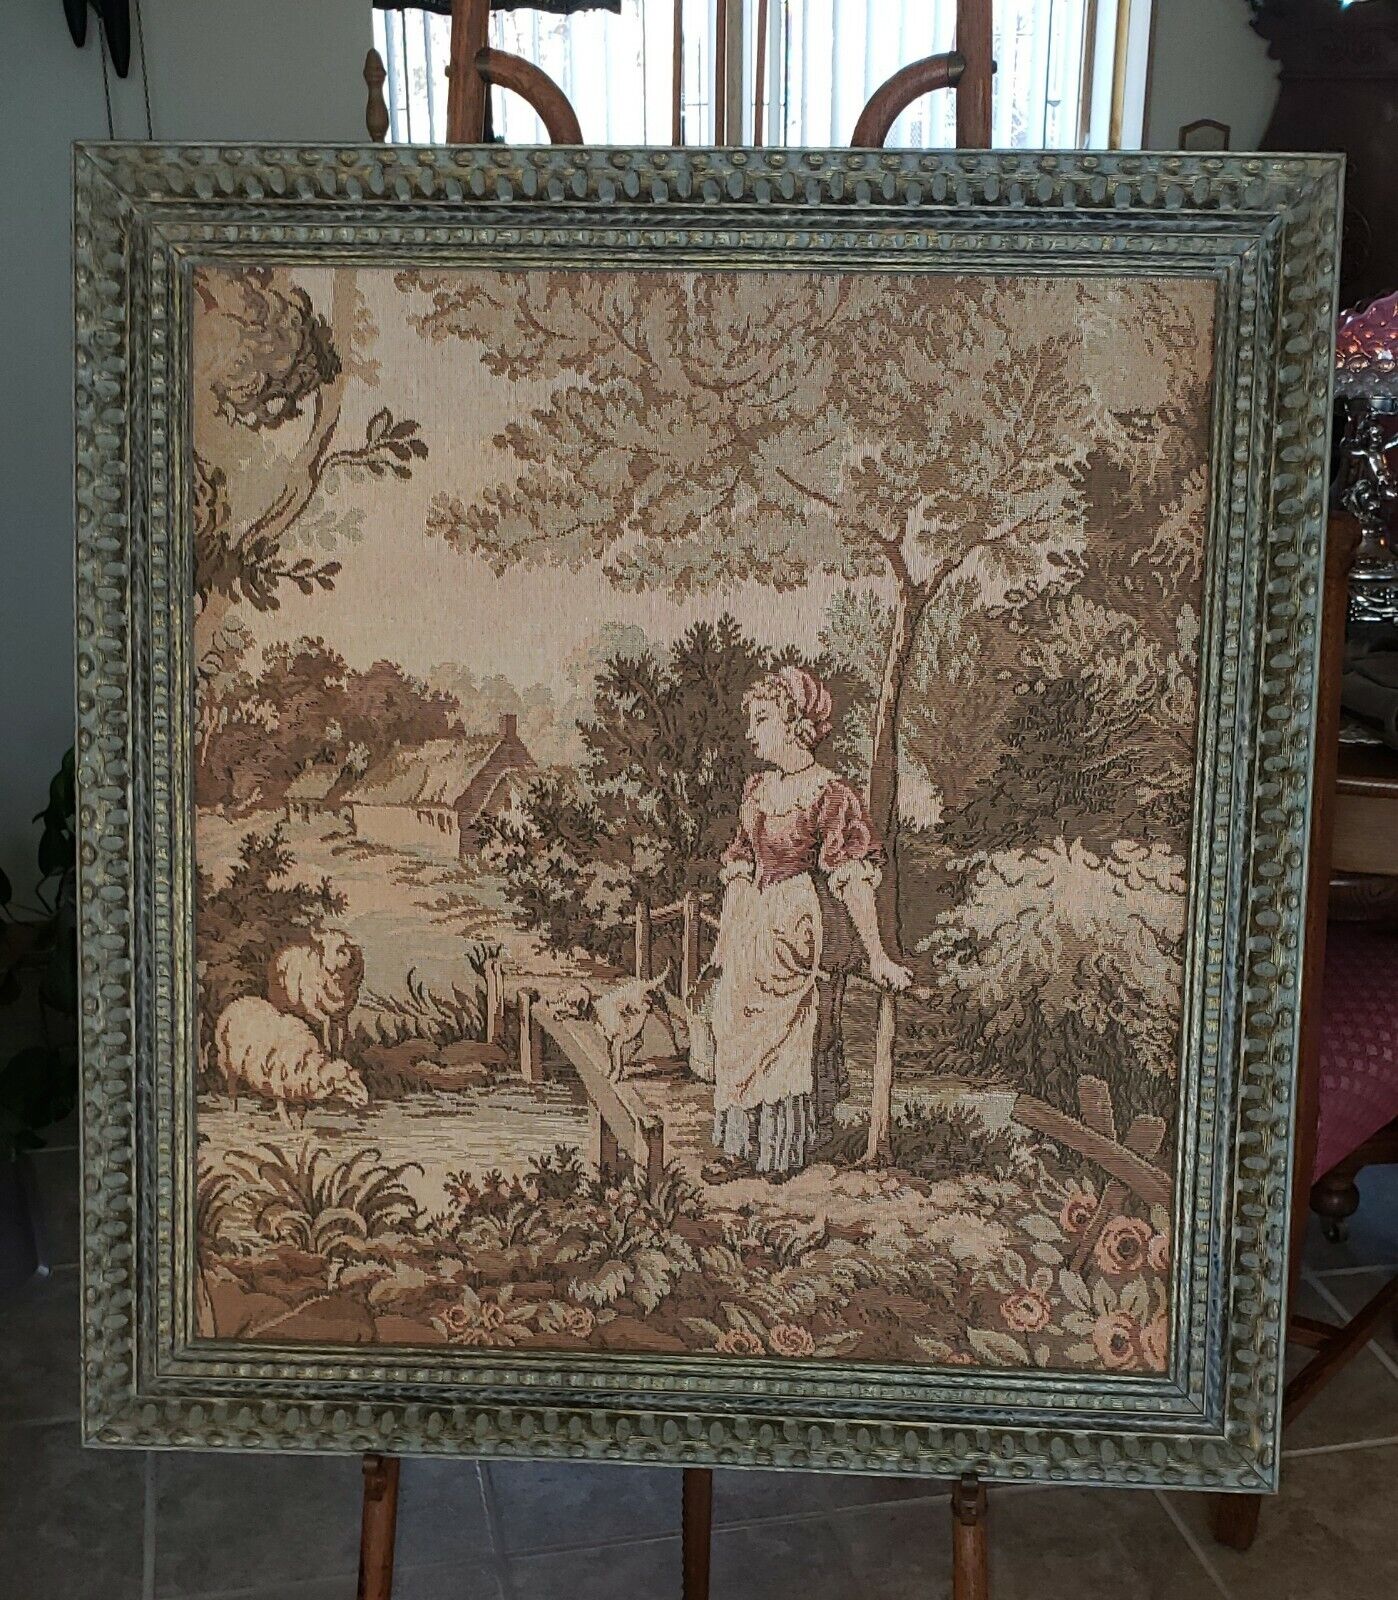 25" x 23" Large Framed Vintage French Tapestry "Maiden" (country) Wall Hanging